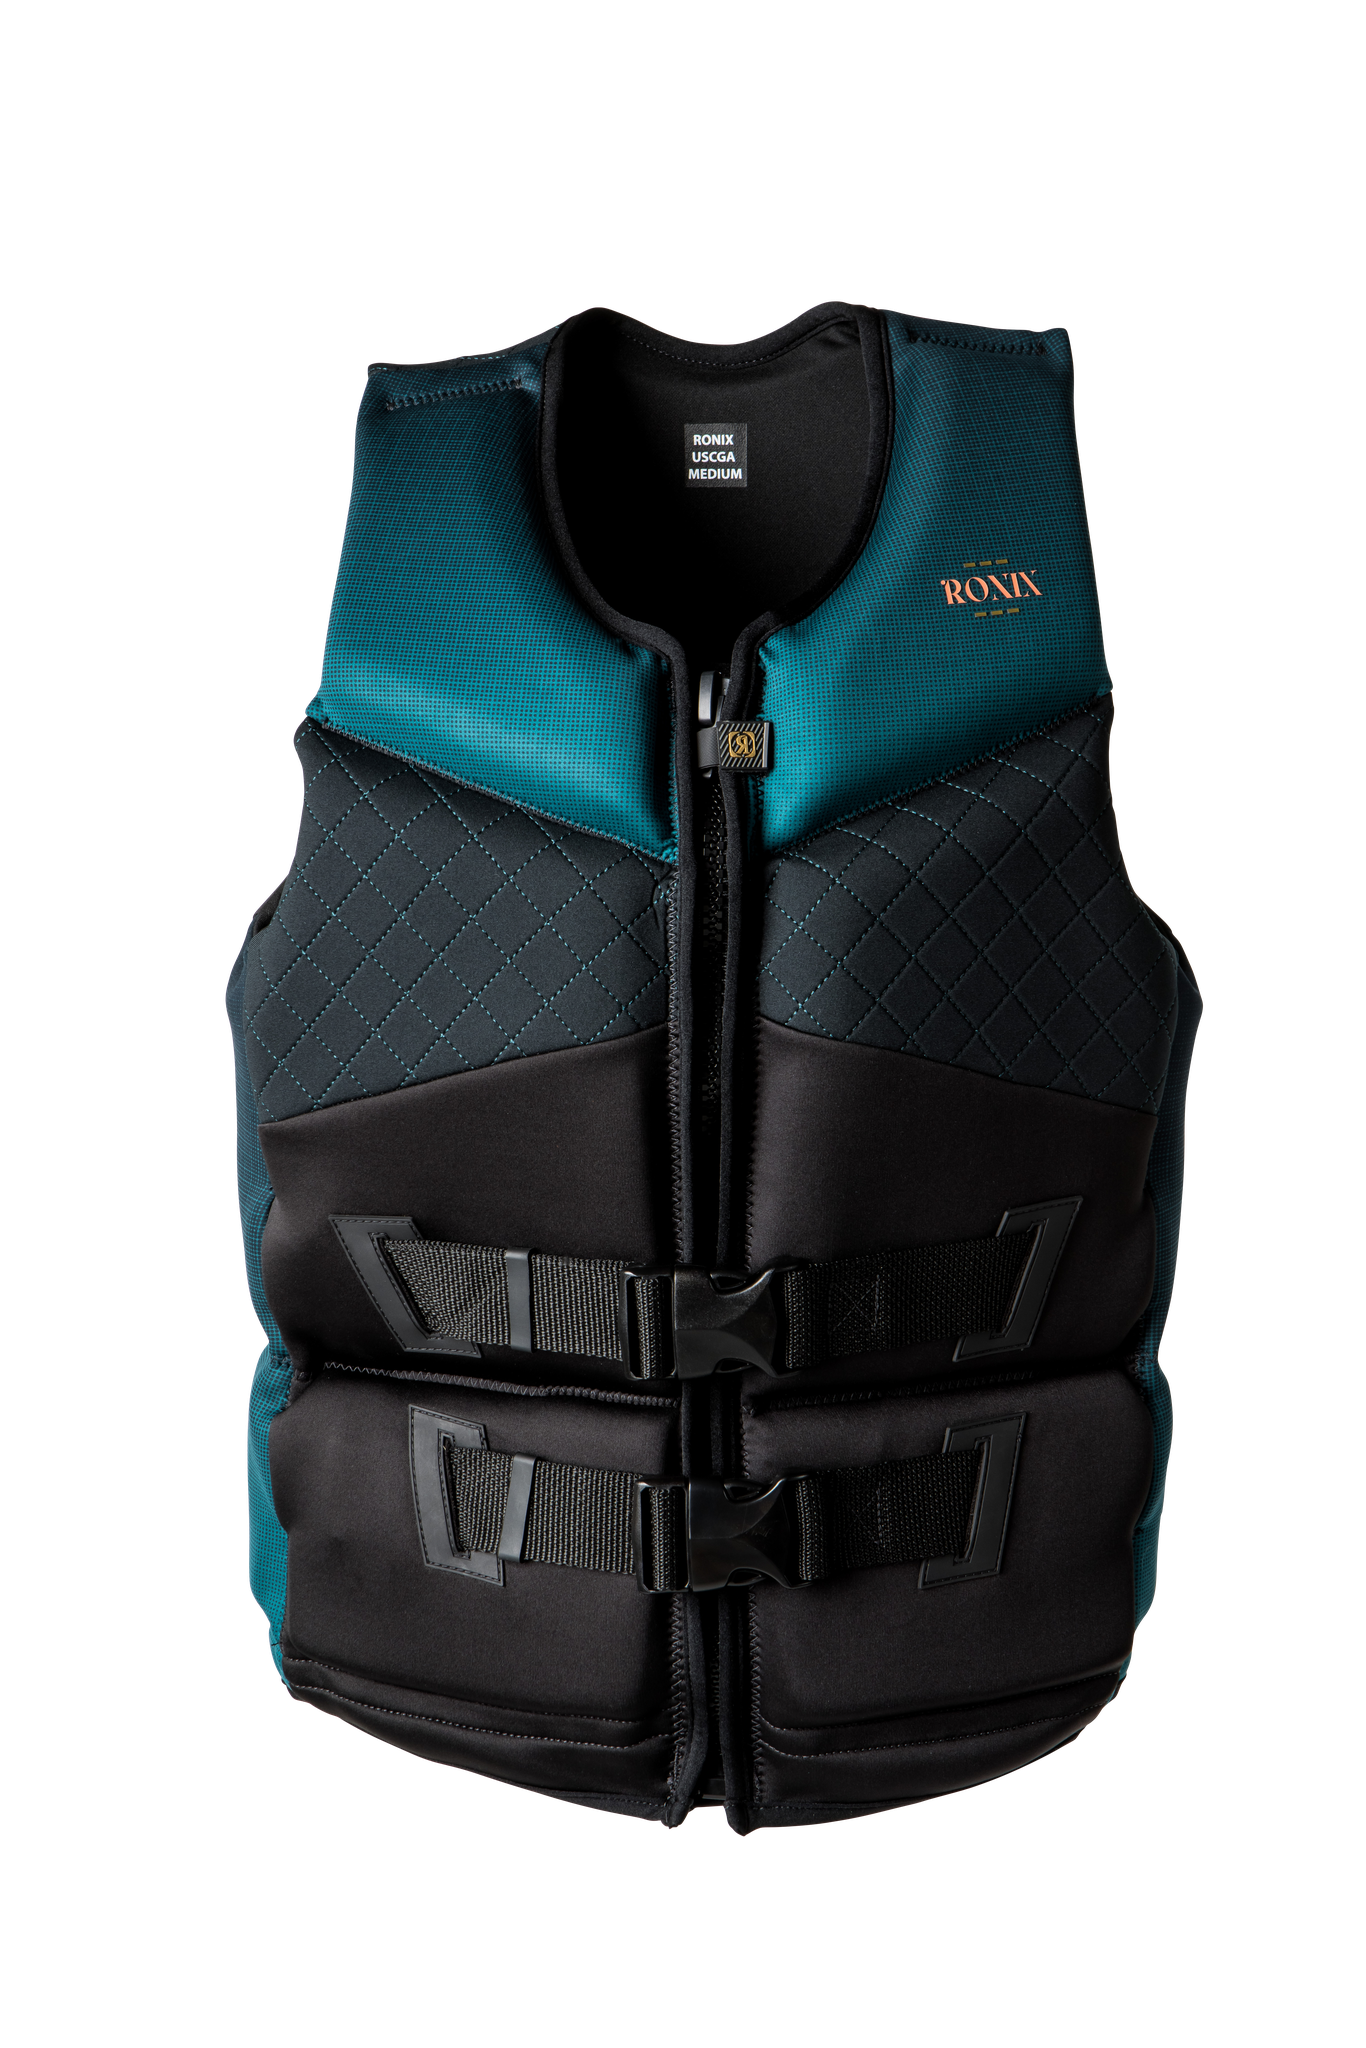 The Ronix Women's Imperial Capella 3.0 CGA Vest, a women's life jacket with a stylish blue and black design, is water-resistant to ensure optimal functionality and safety in aquatic activities.